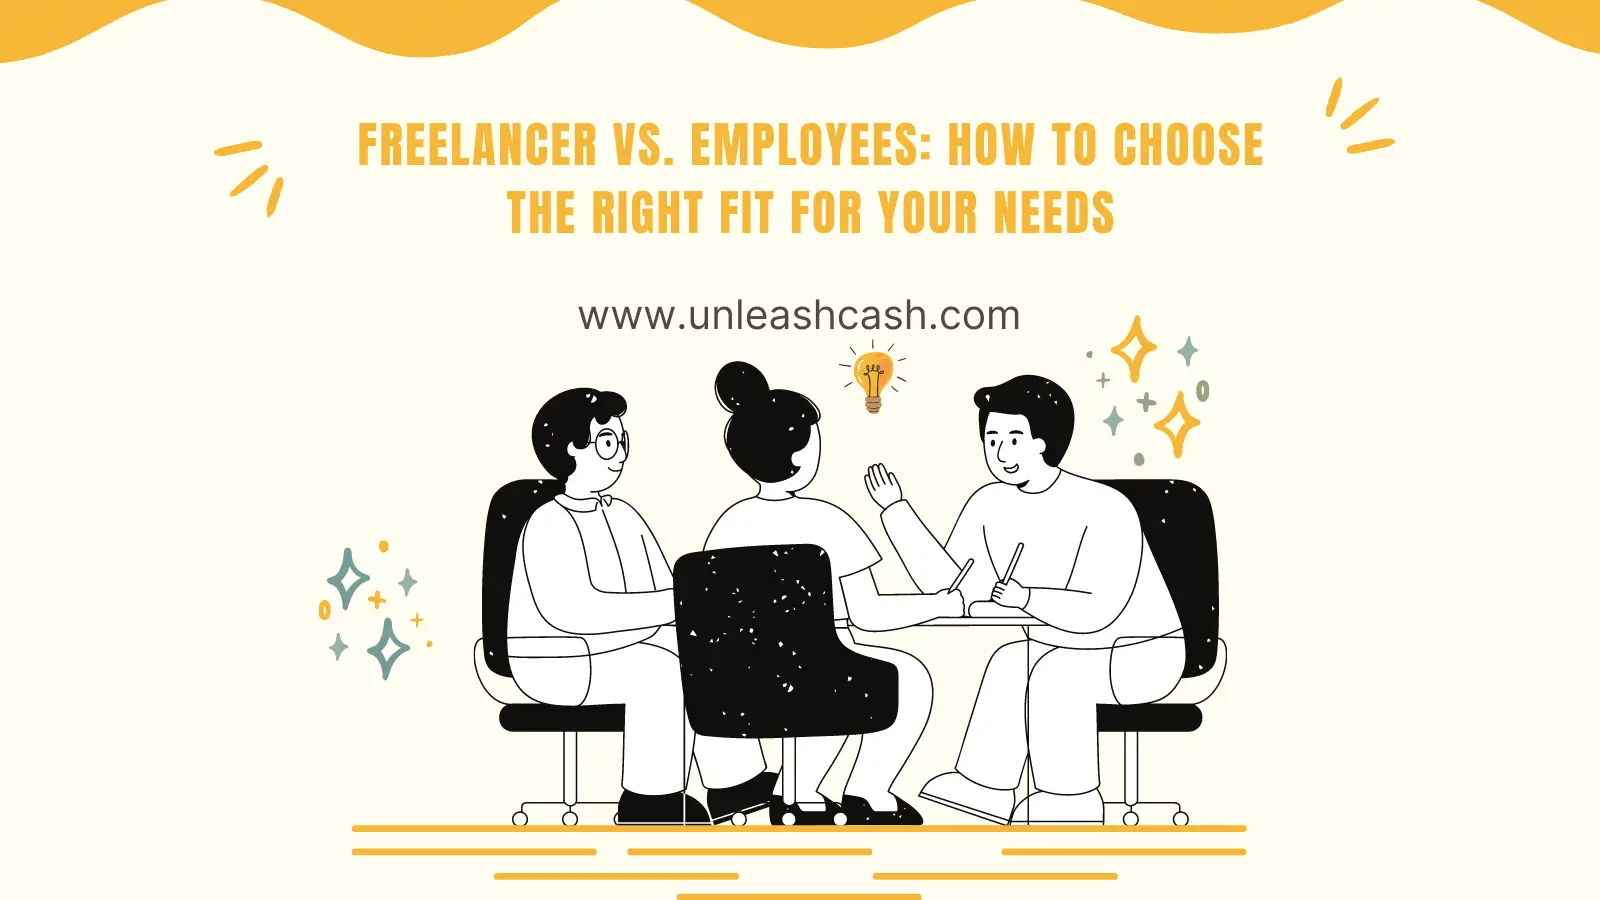 Freelancer Vs. Employees: How To Choose The Right Fit For Your Needs